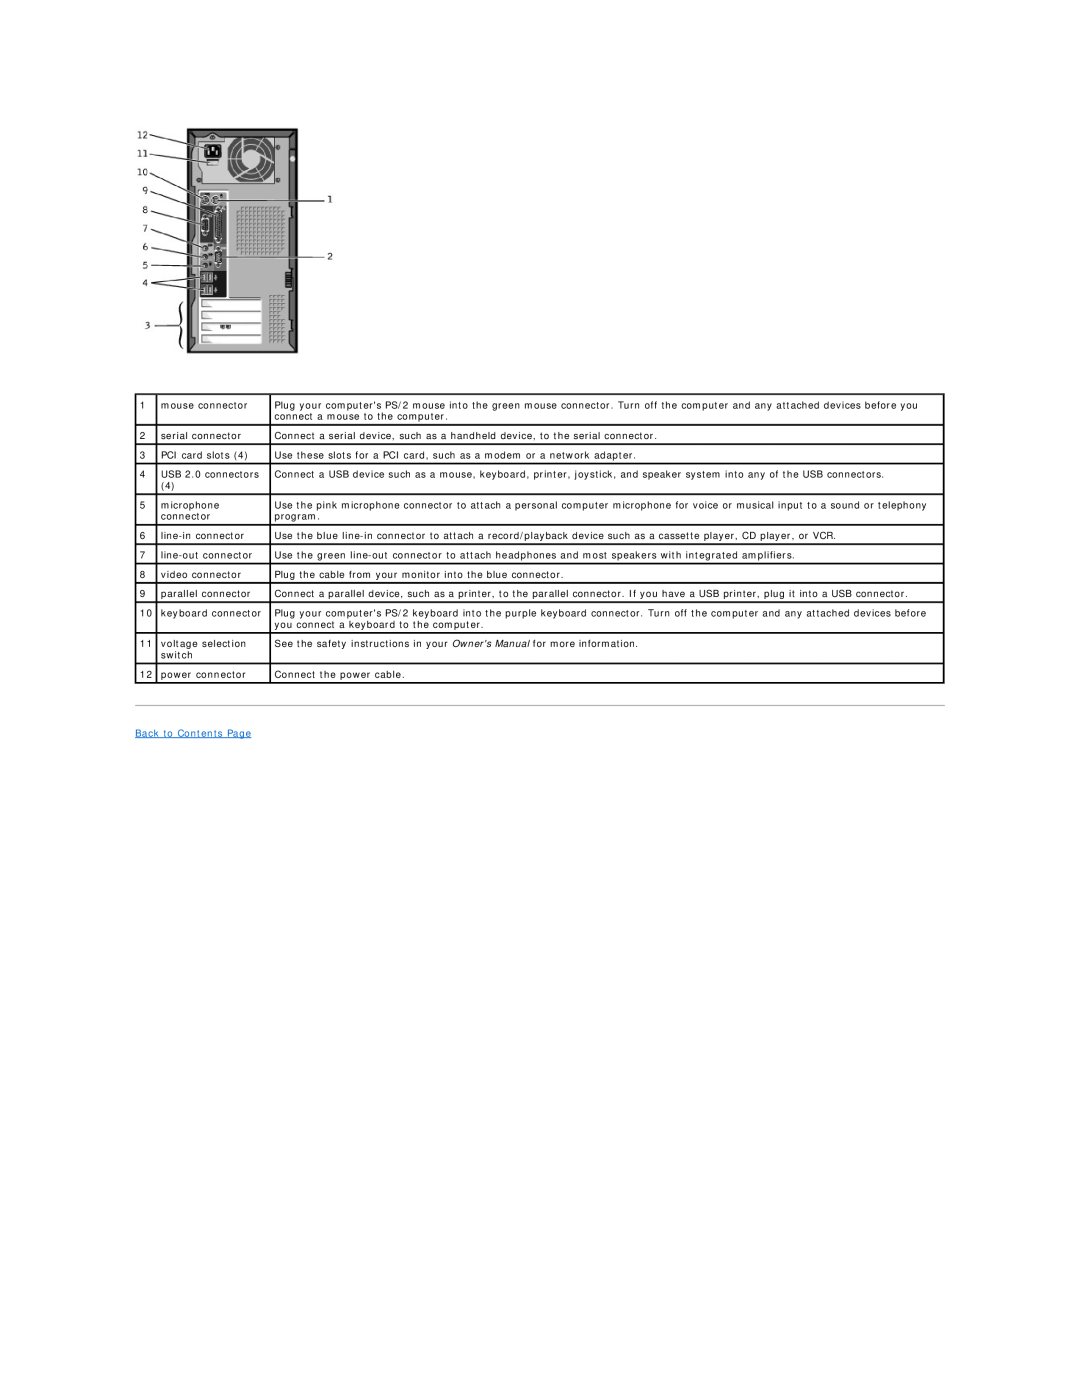 Dell 2300 technical specifications Back to Contents Page 